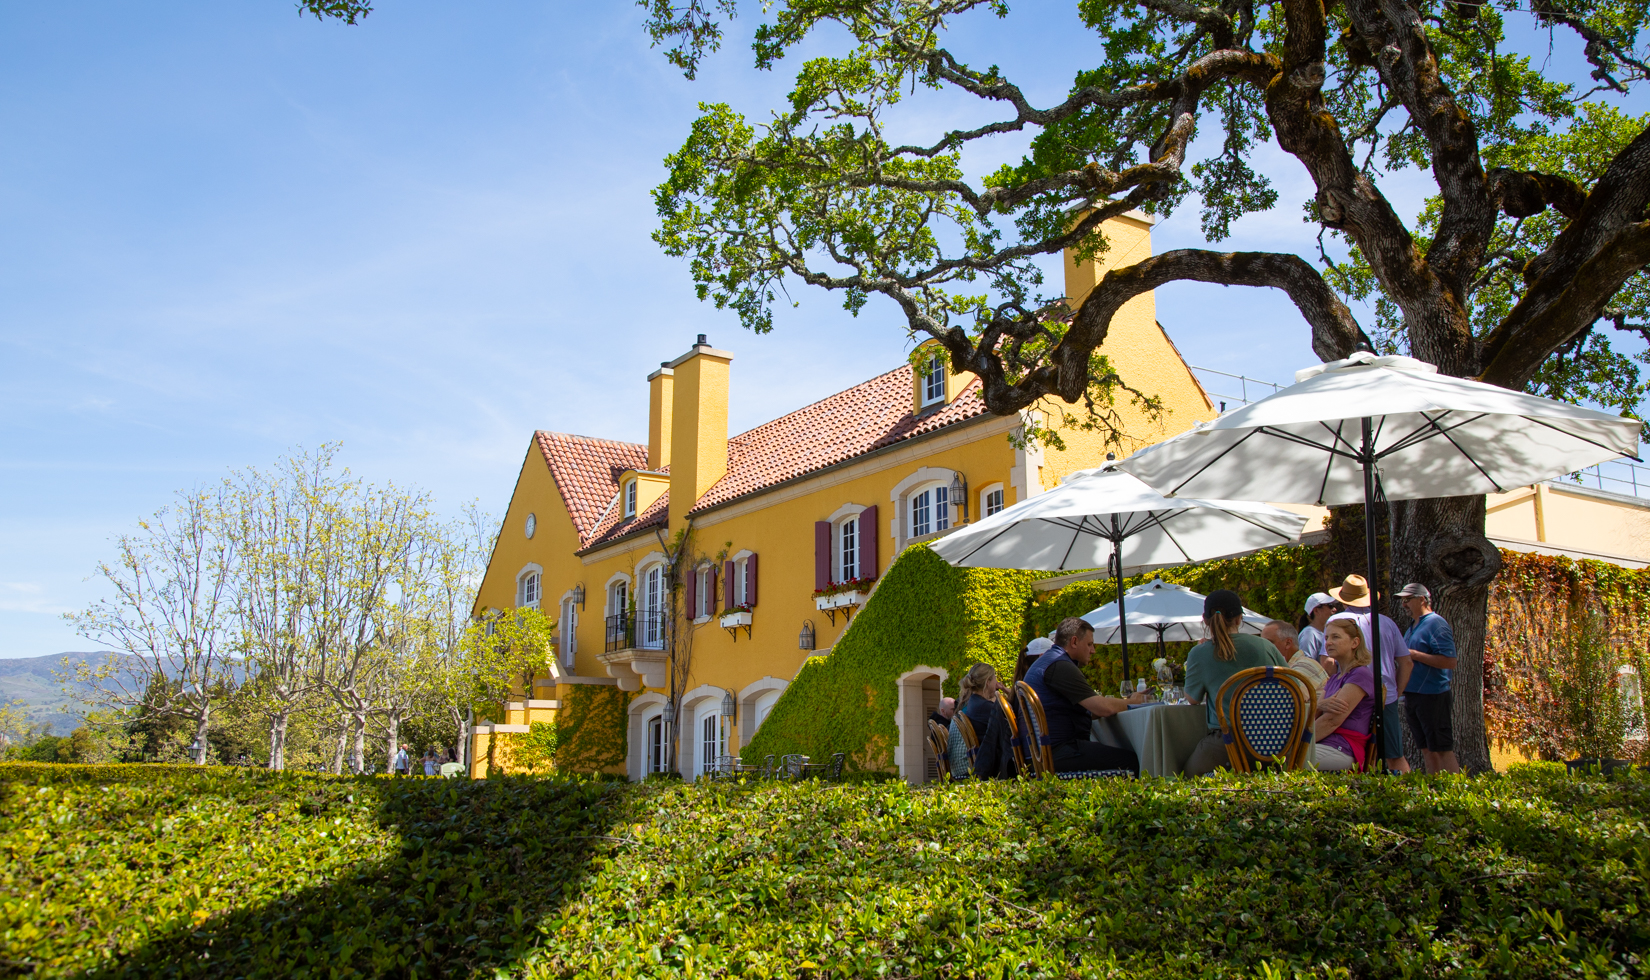 guests seated on terrace with yellow chateau and trees in the background